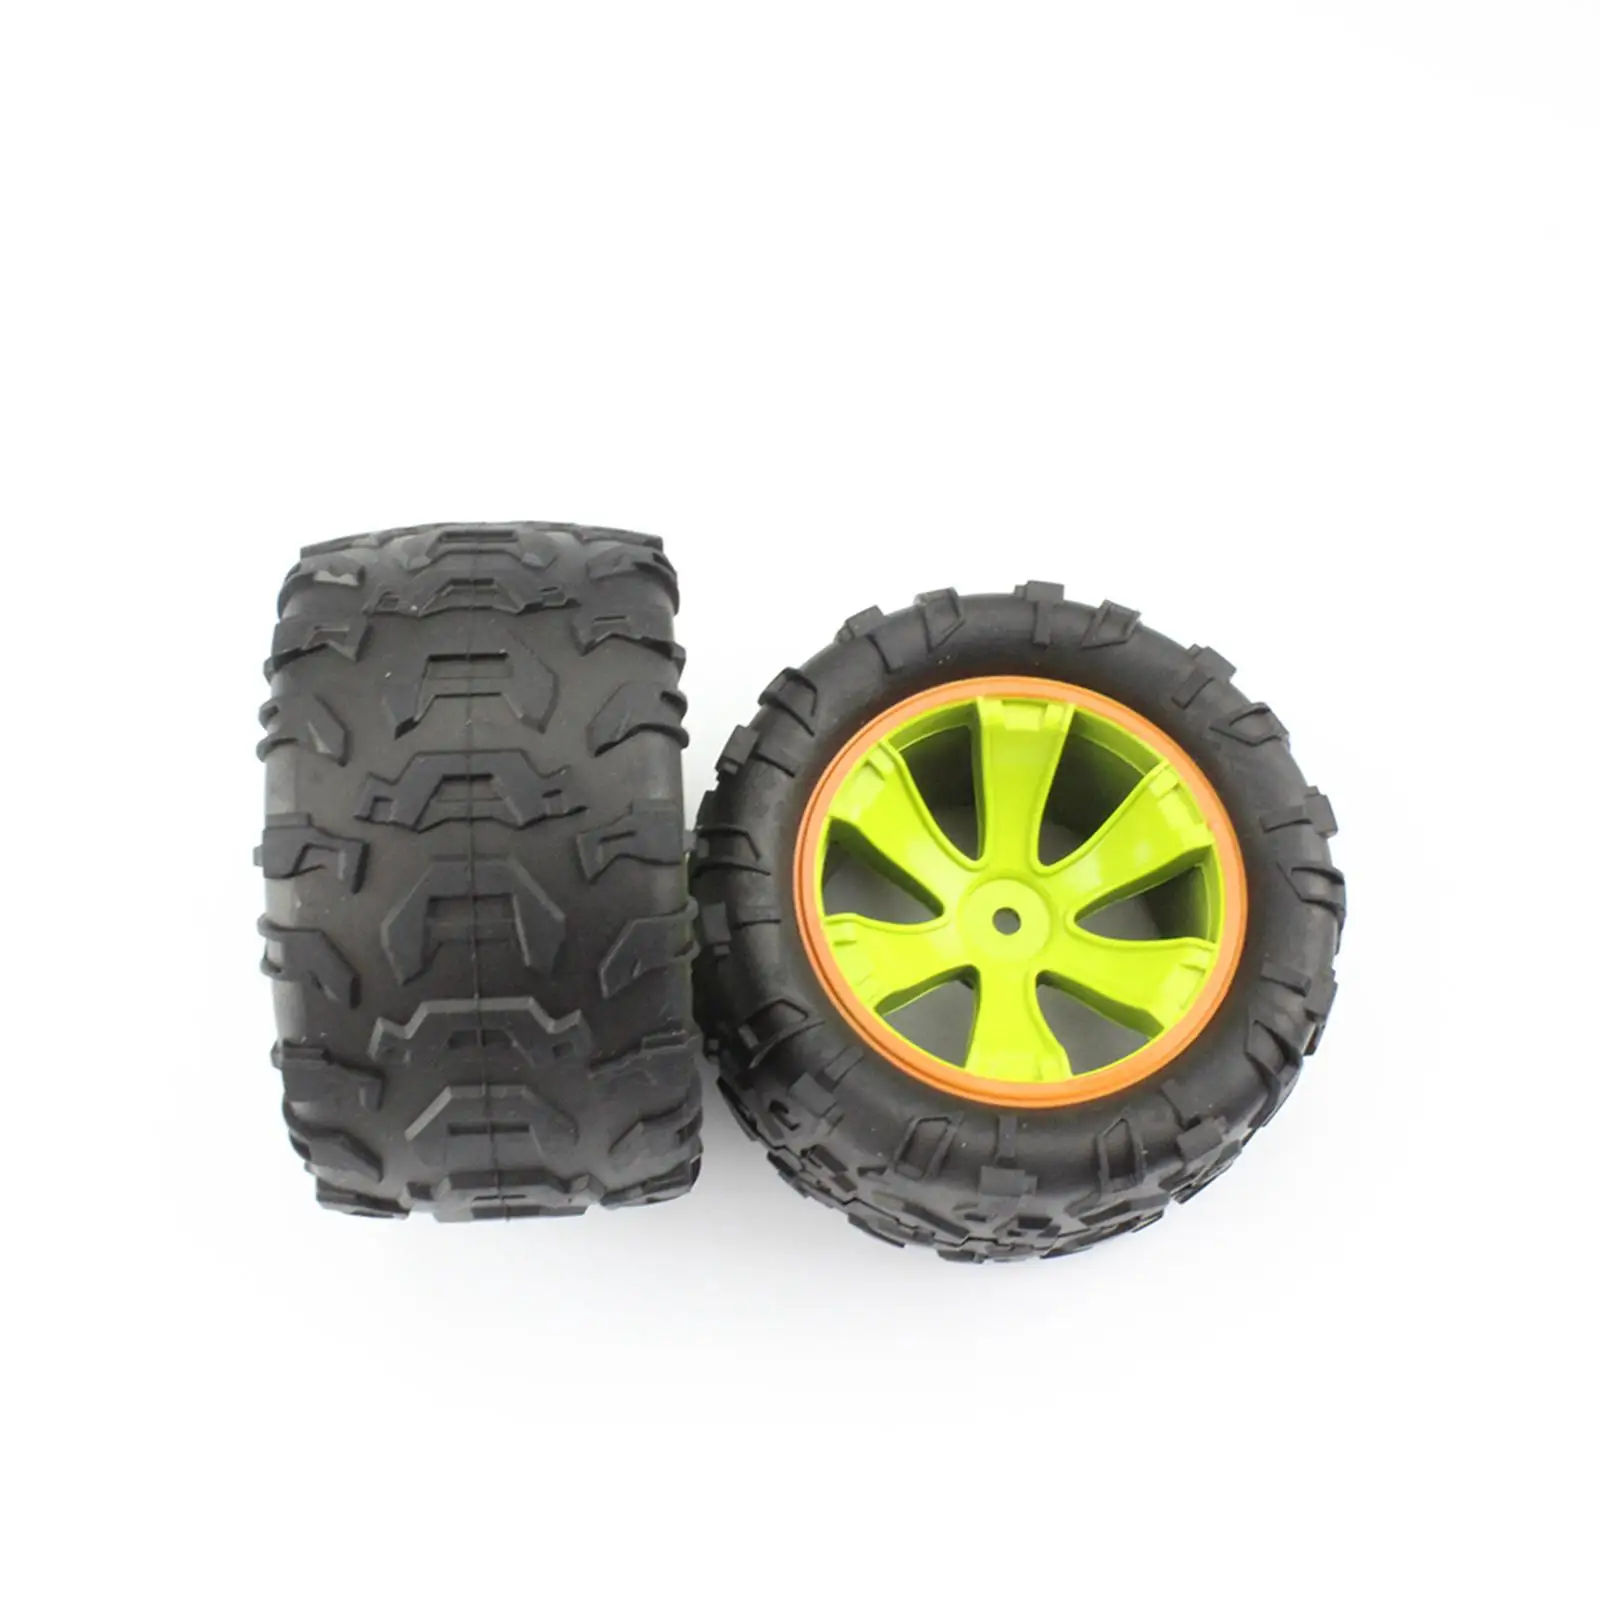 2Pcs High Quality Wheel for Wltoys 144002 Remote Control Vehicle Spare Parts Replacement